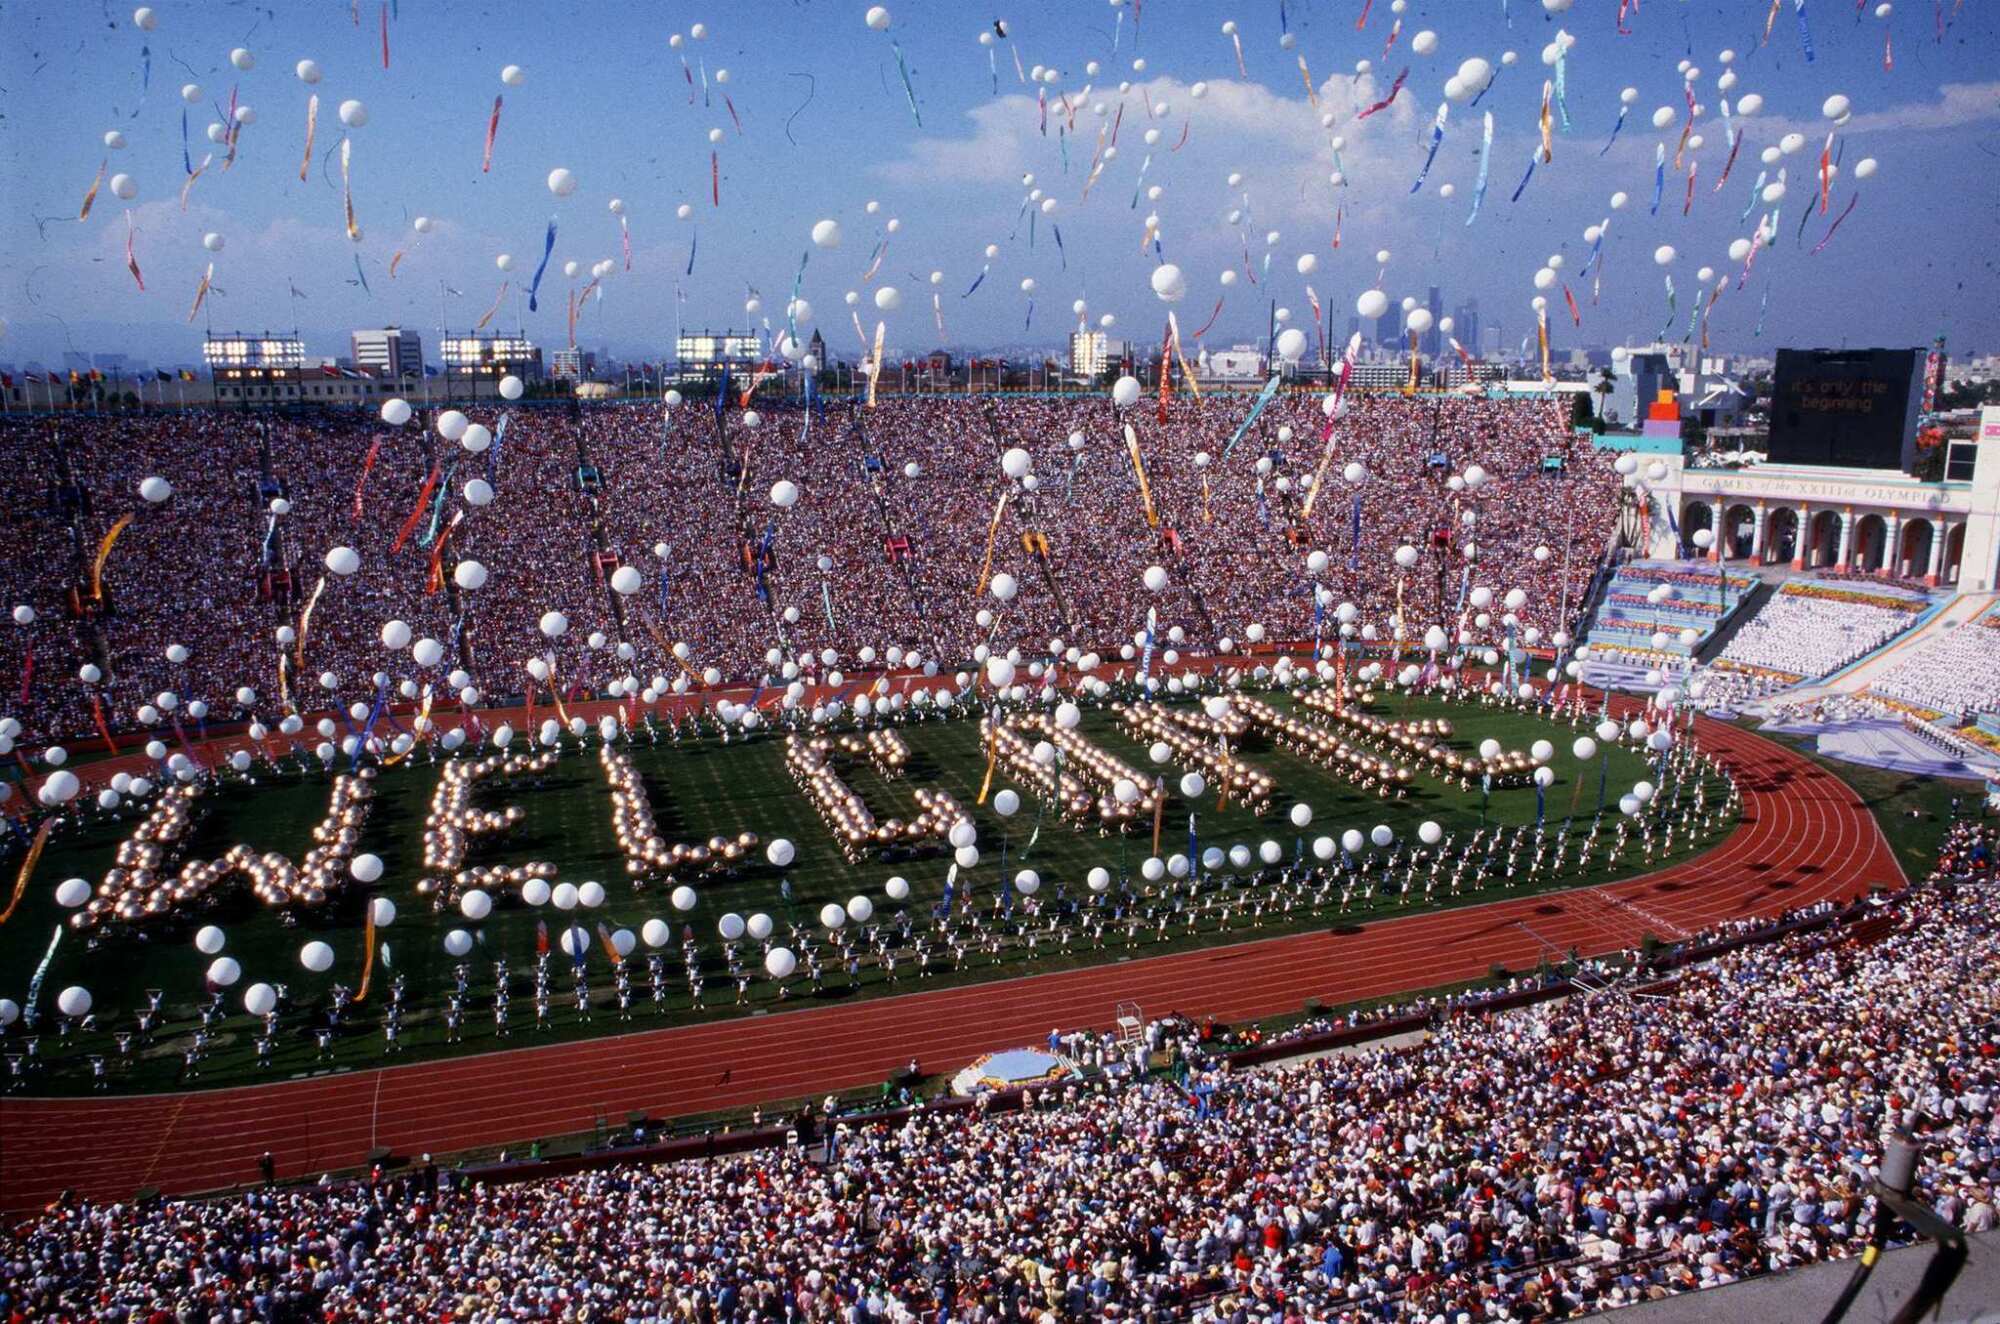 Balloons are released during a festive opening ceremony for the 1984 Olympics at the Memorial Coliseum.